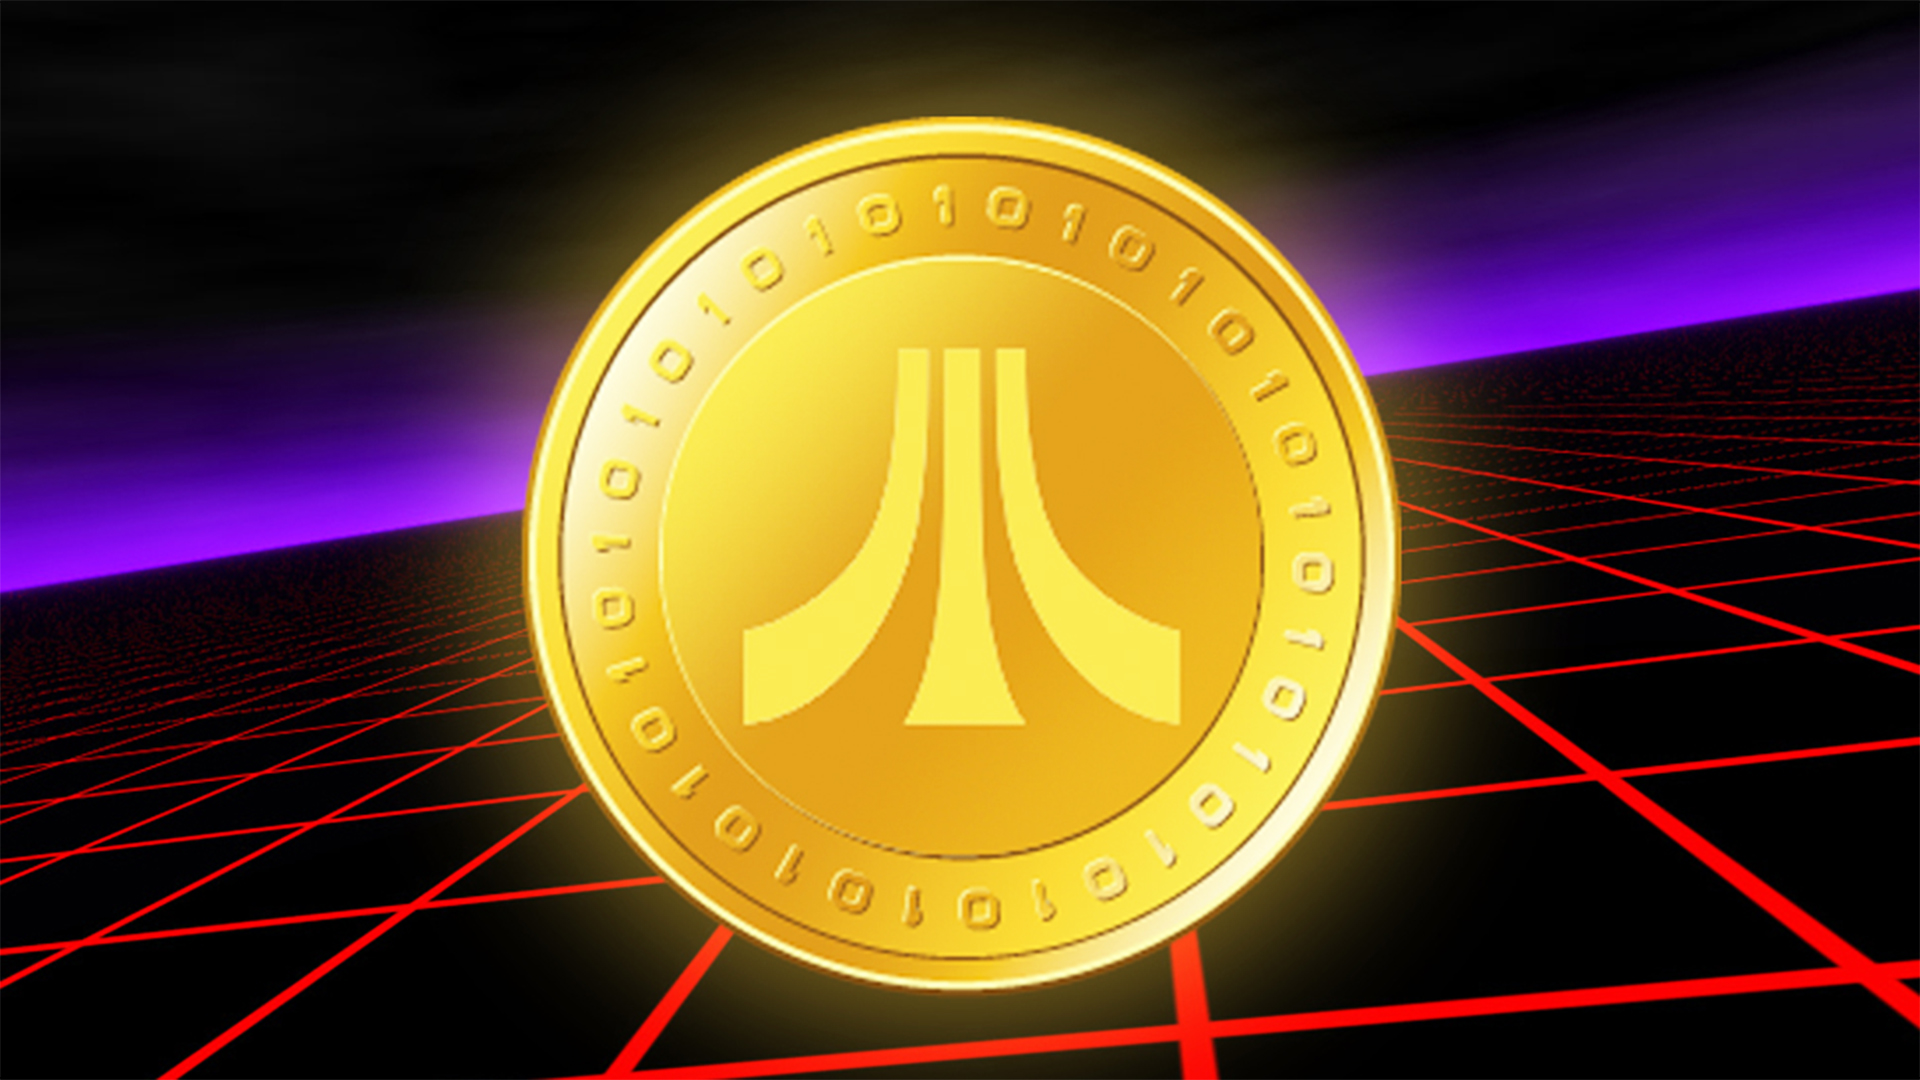 Game Maker Atari Is Planning to Launch Its Own Cryptocurrency